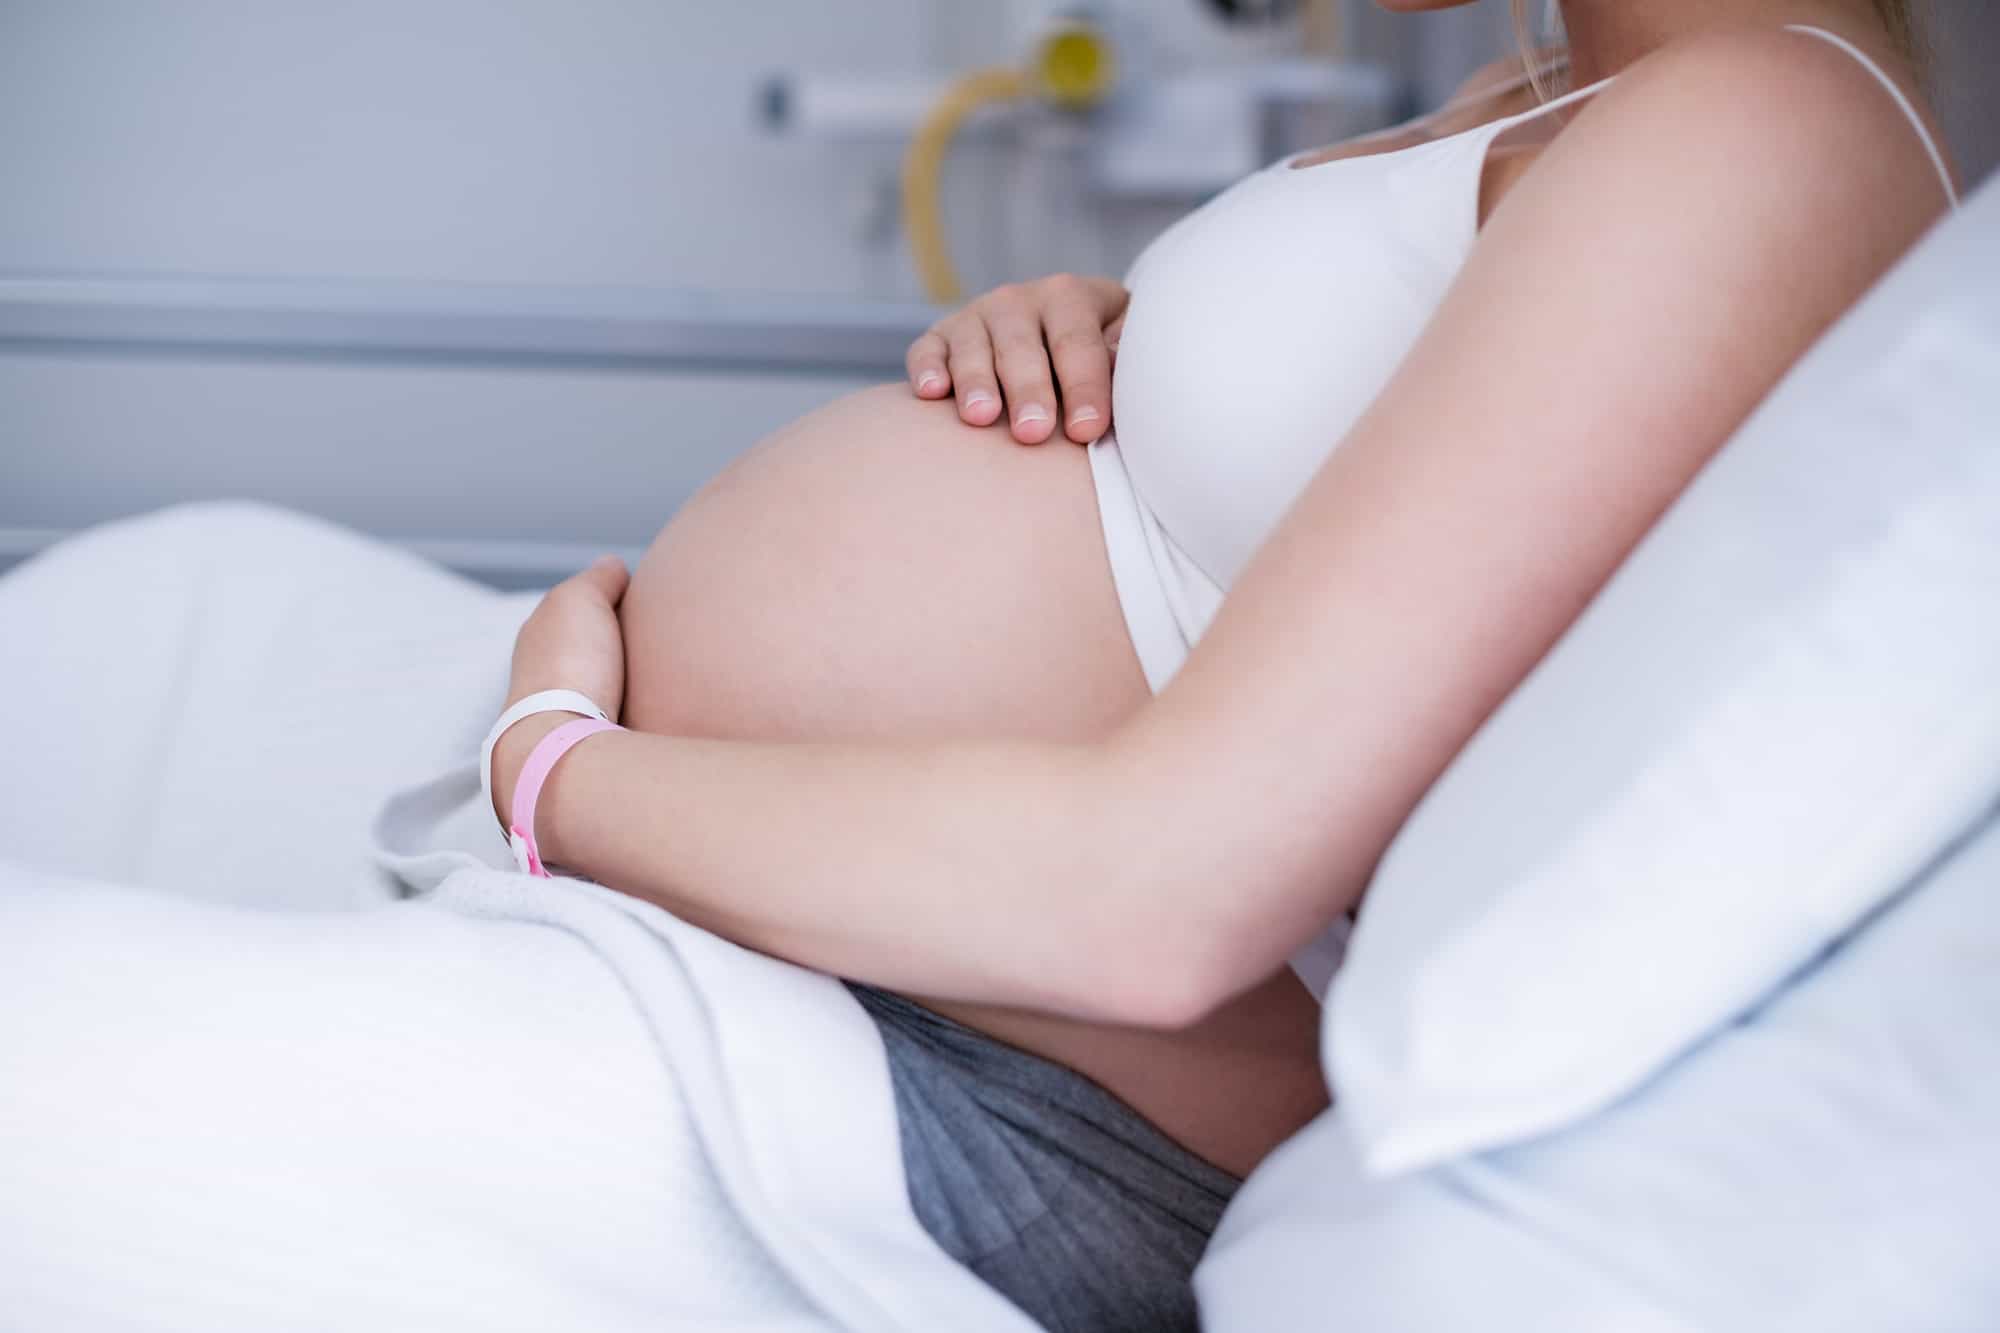 9 Things to Expect at the Hospital During Stages of Labor (#7 is pretty obvious)